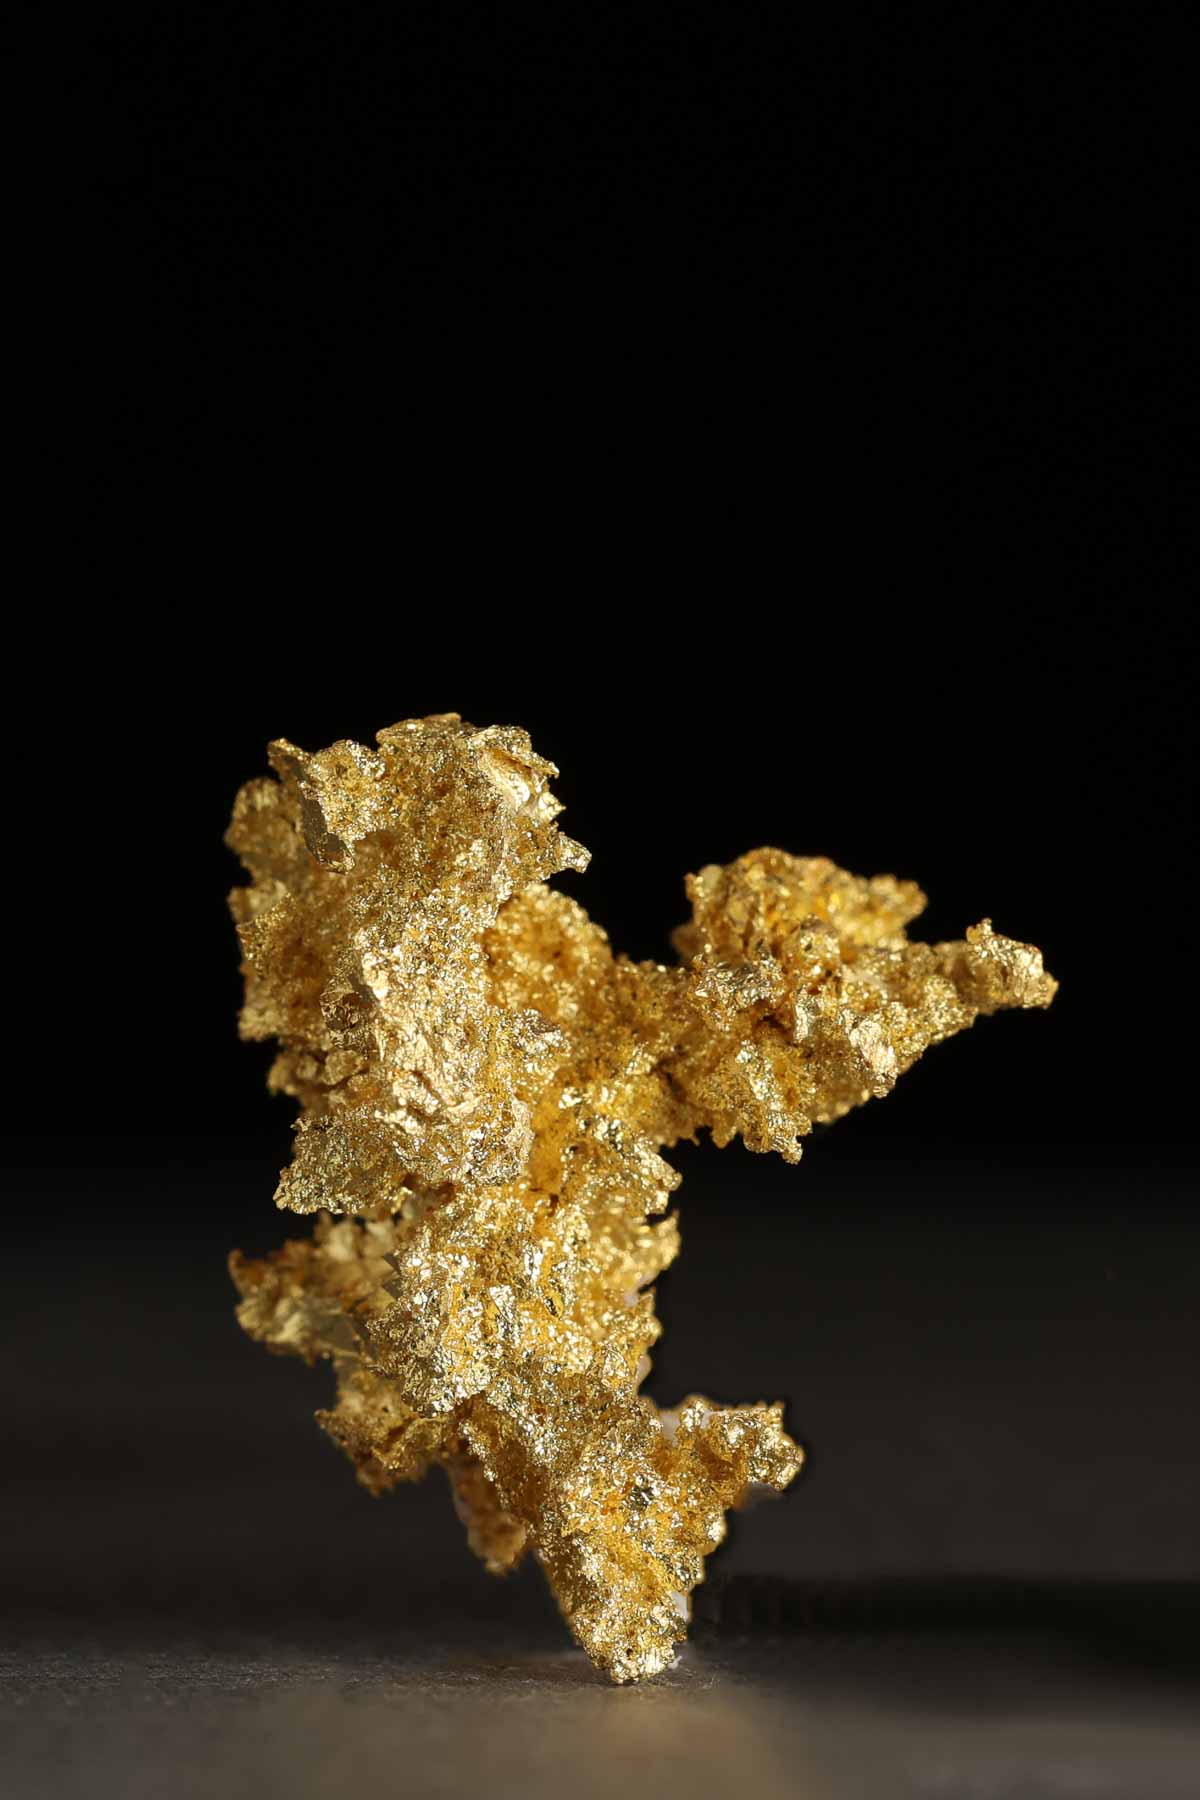 Thick and Well Formed Crystalline Gold Specimen - Oriental Mine